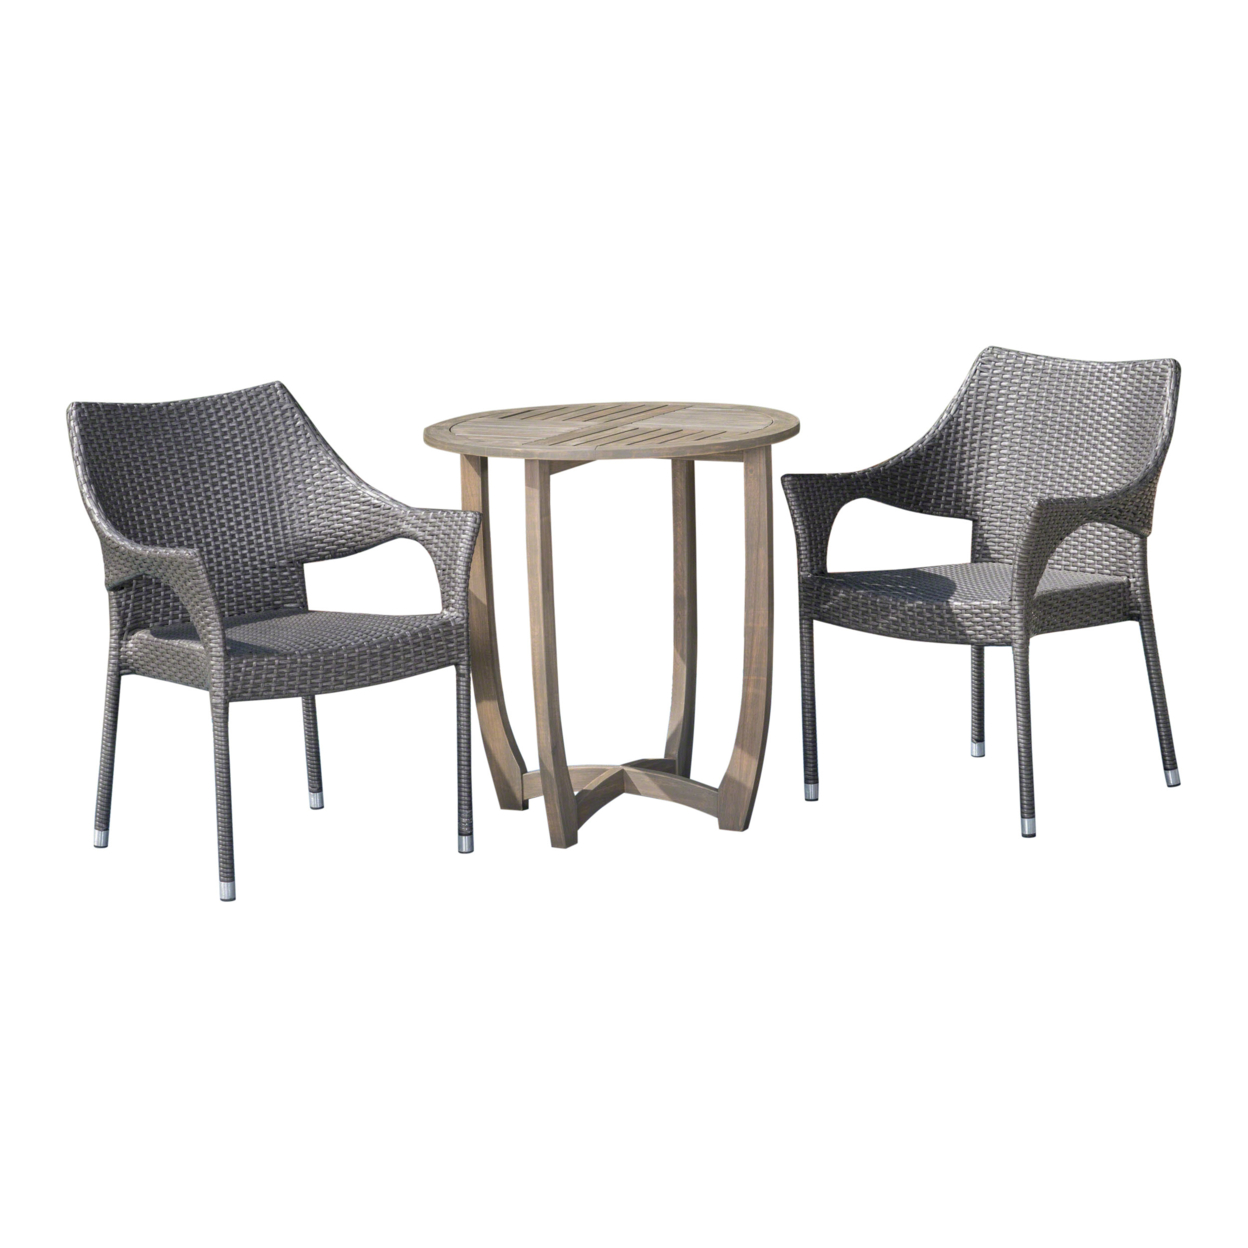 Mann Outdoor 3 Piece Wood And Wicker Bistro Set, Gray And Gray